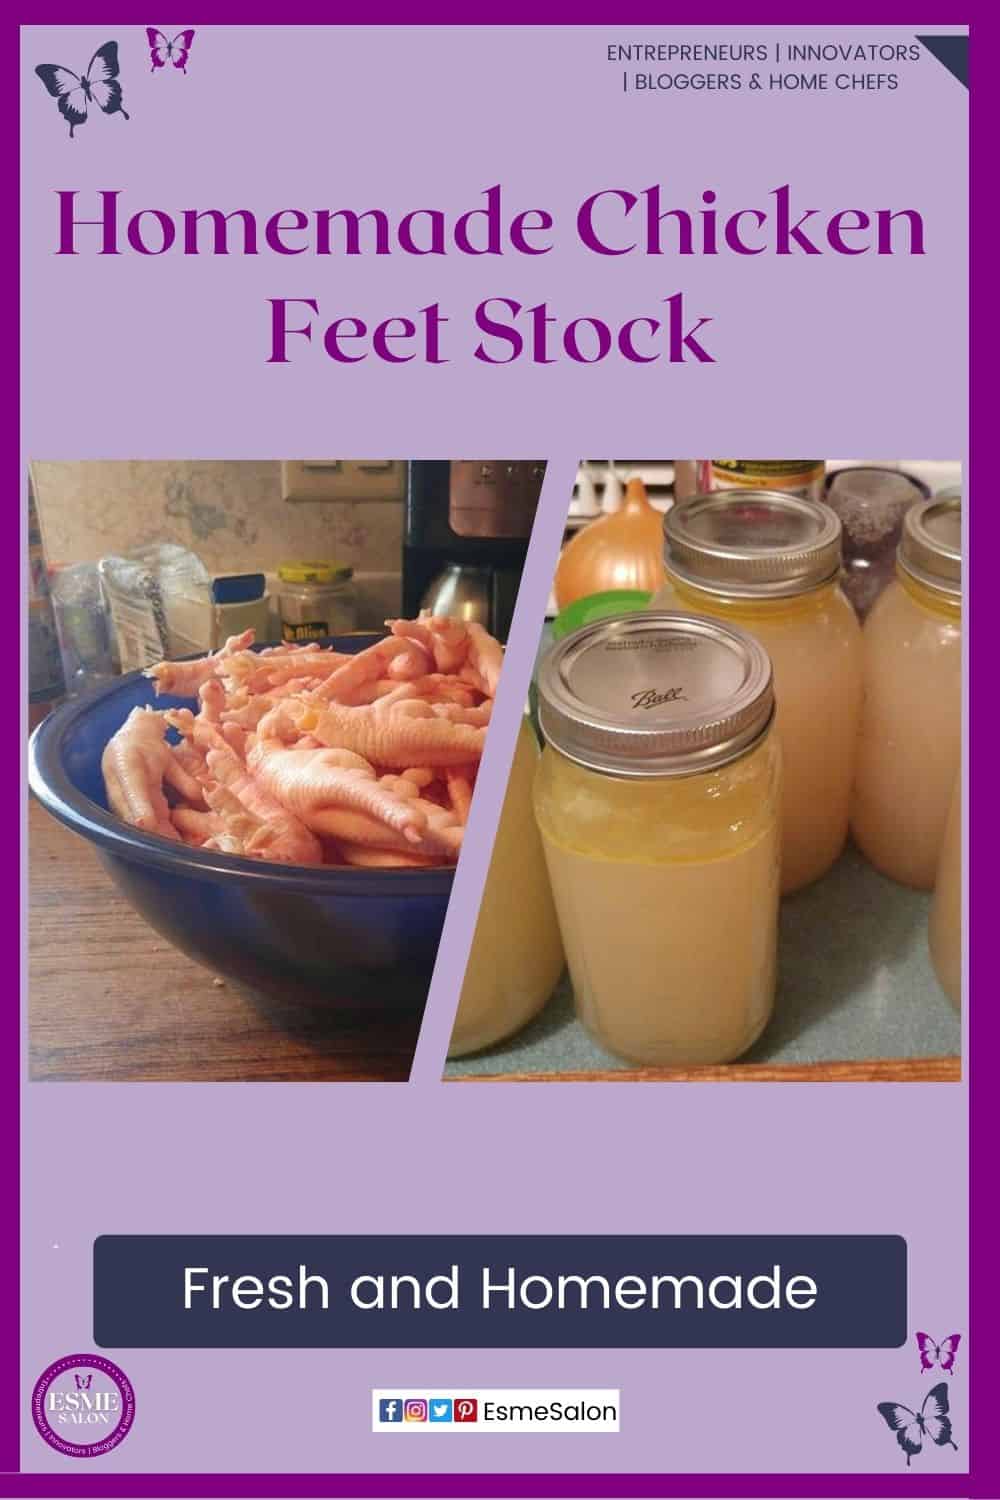 an image of fresh chicken feet and Homemade Chicken Feet Stock botled